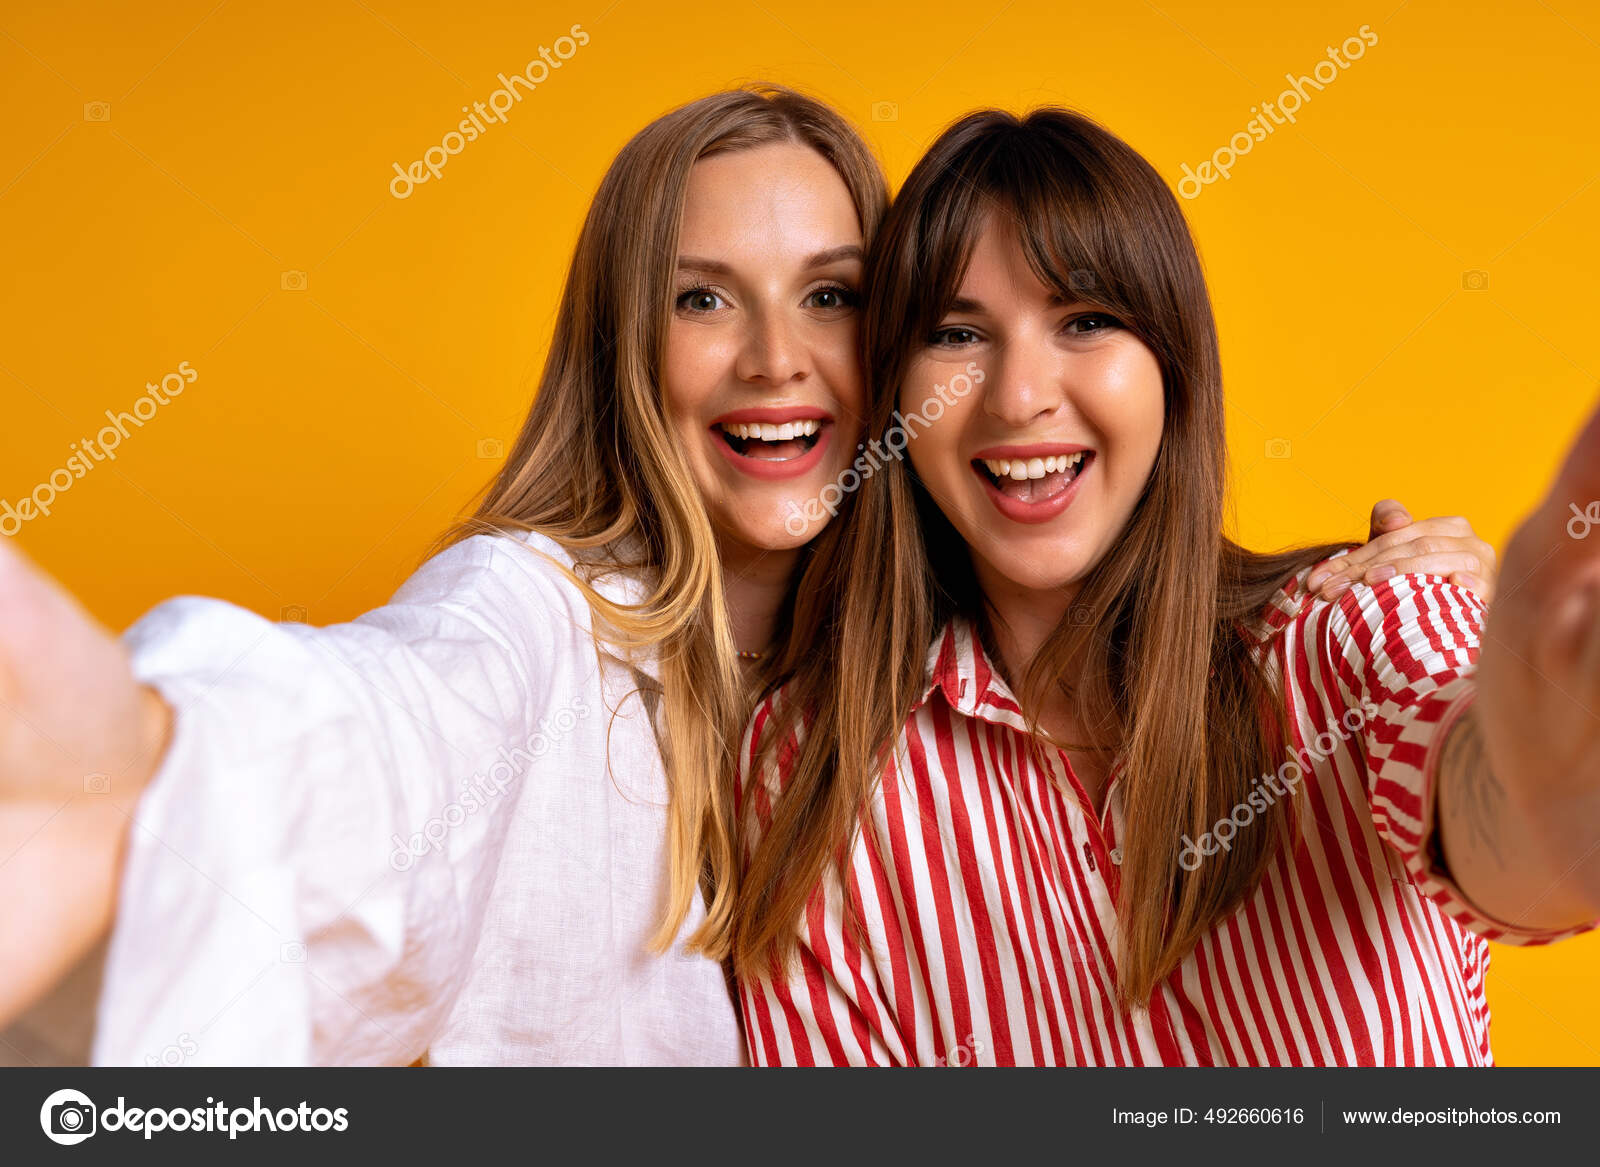 photo ideas | Sisters photoshoot poses, Friend photoshoot, Friend pictures  poses